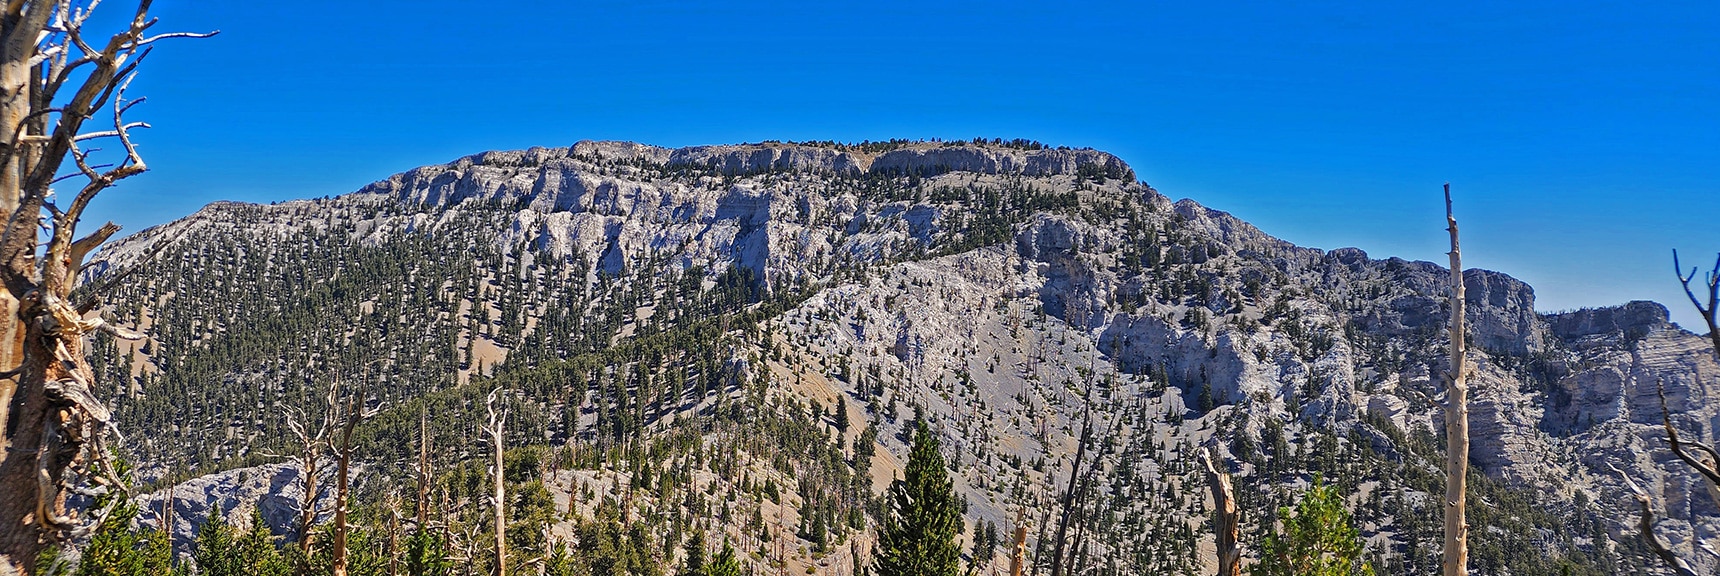 First Sight of Mummy Mountain from Lee/Kyle Canyon Upper Ridgeline | Mummy Mountain Grand Crossing | Lee Canyon to Deer Creek Road | Mt Charleston Wilderness | Spring Mountains, Nevada |